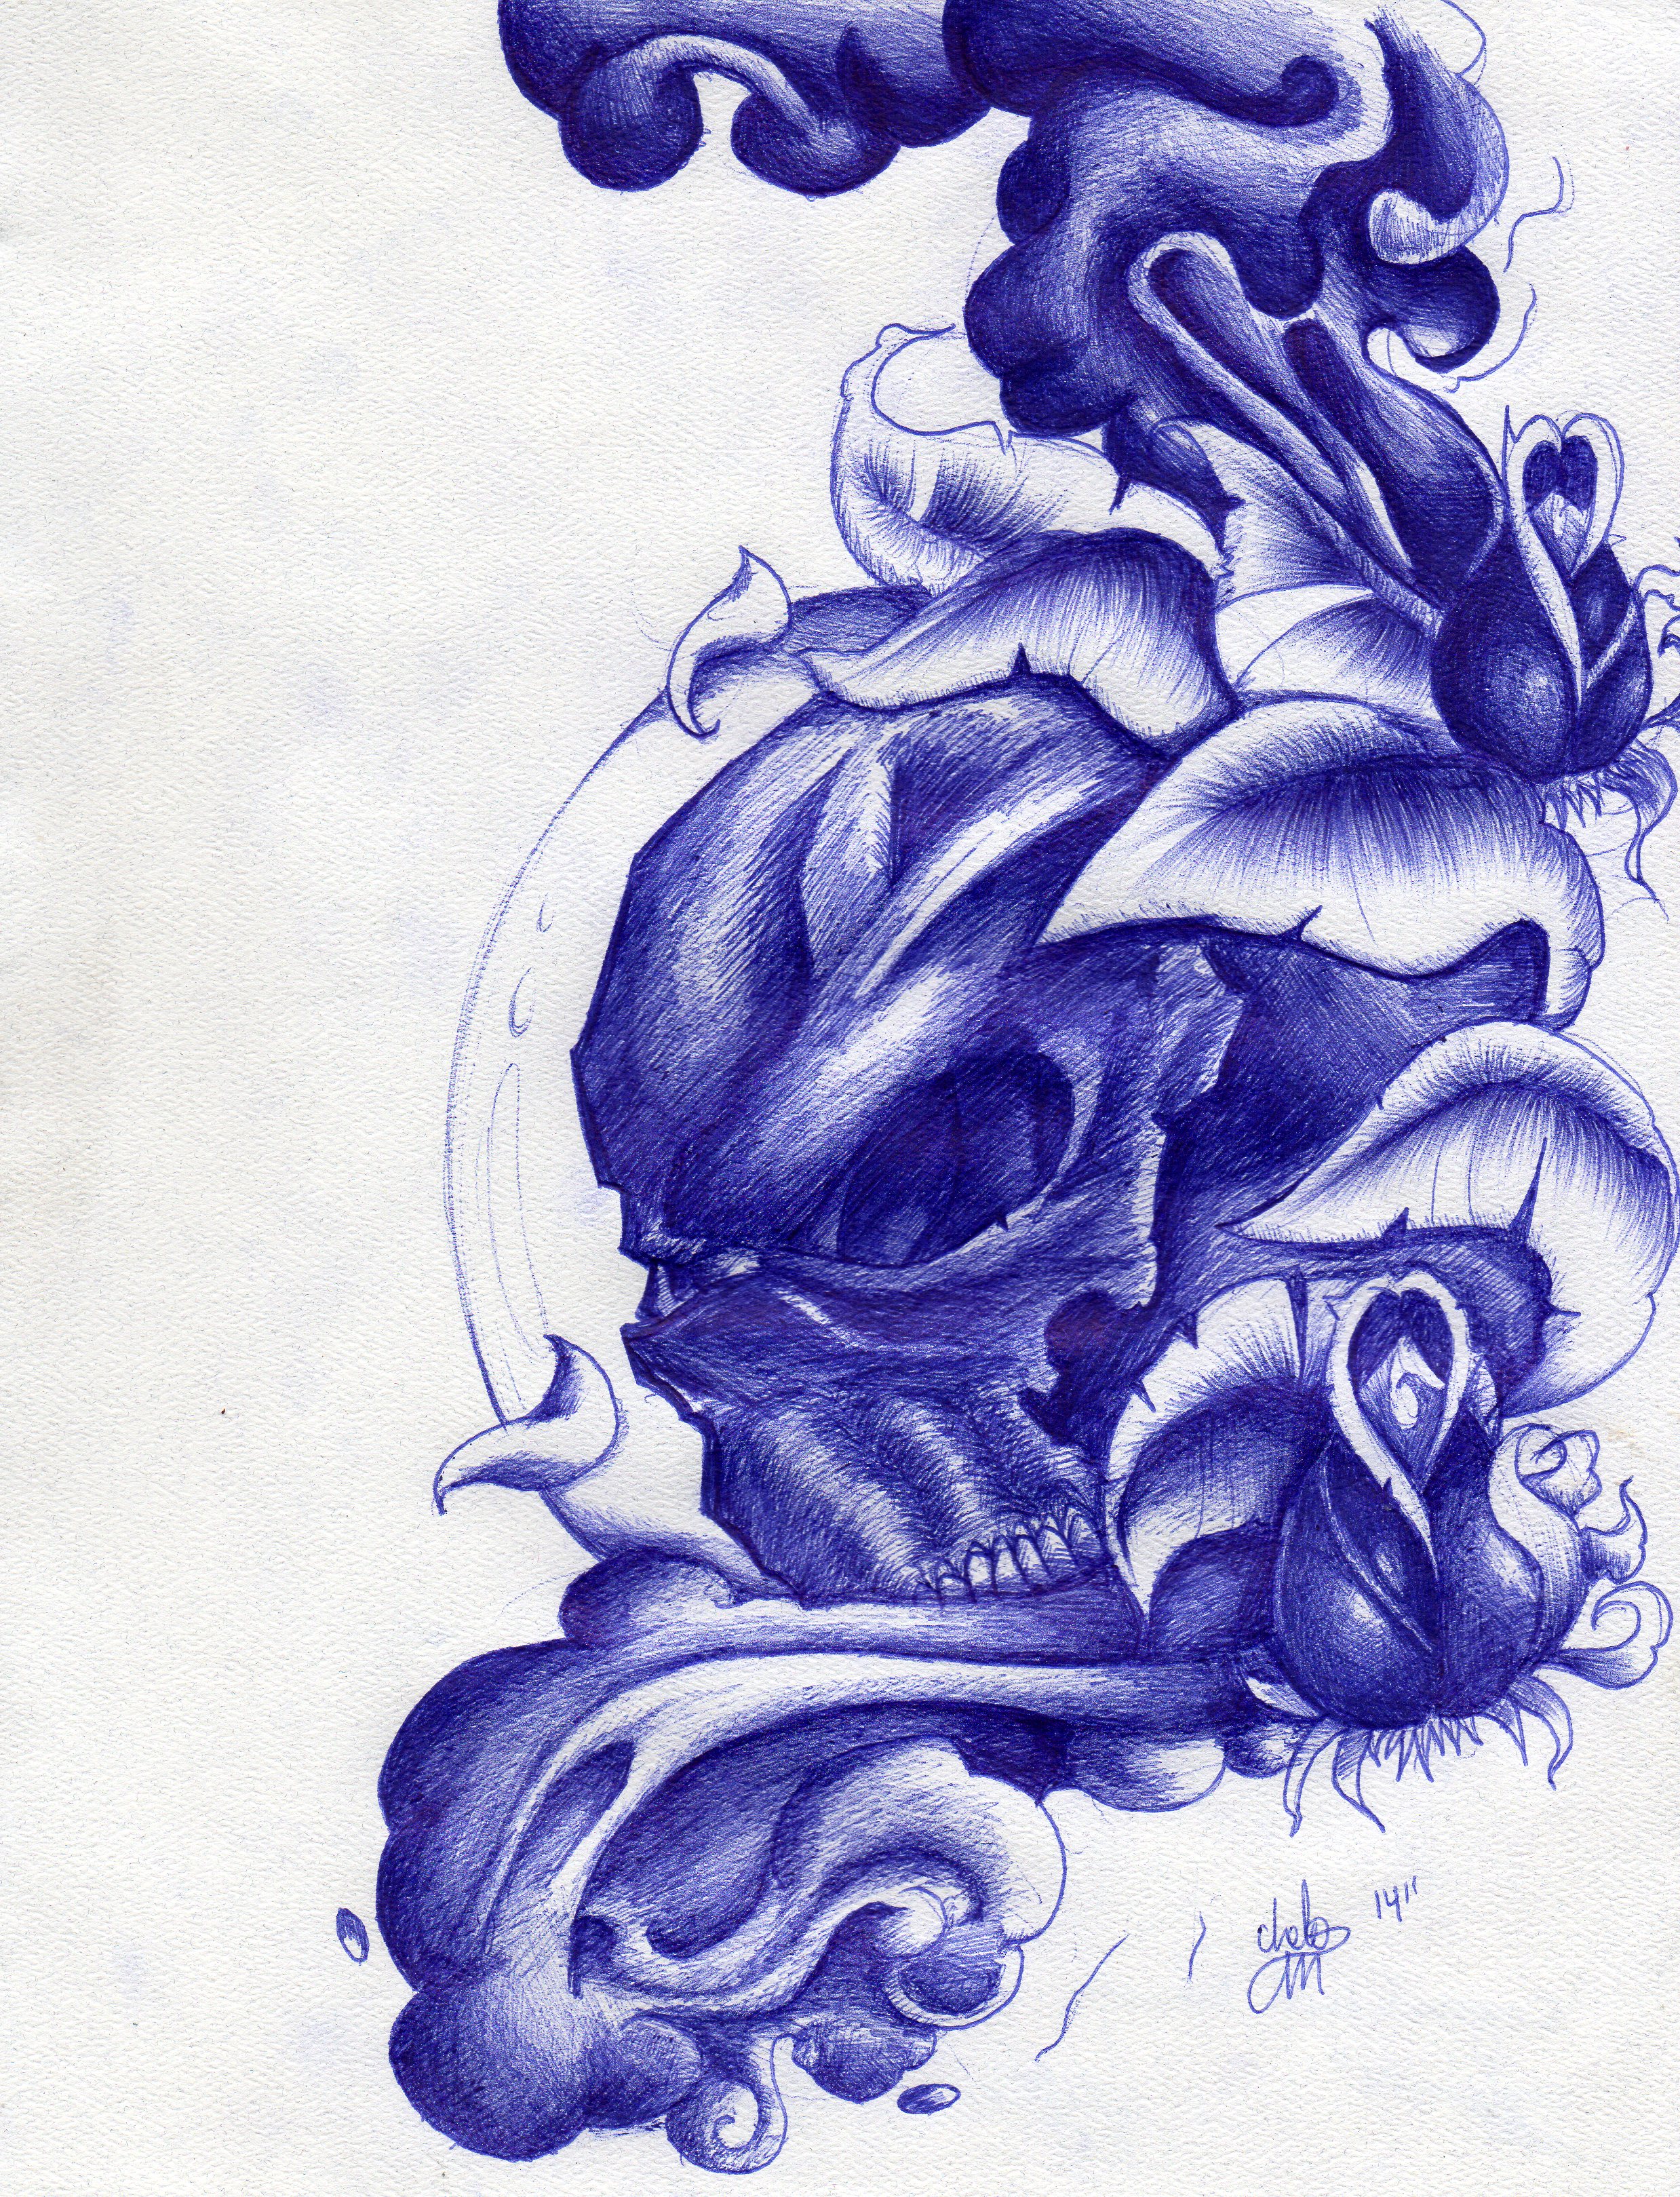 Skull Orb Tattoo Design in blue pen by chelomacabre on DeviantArt